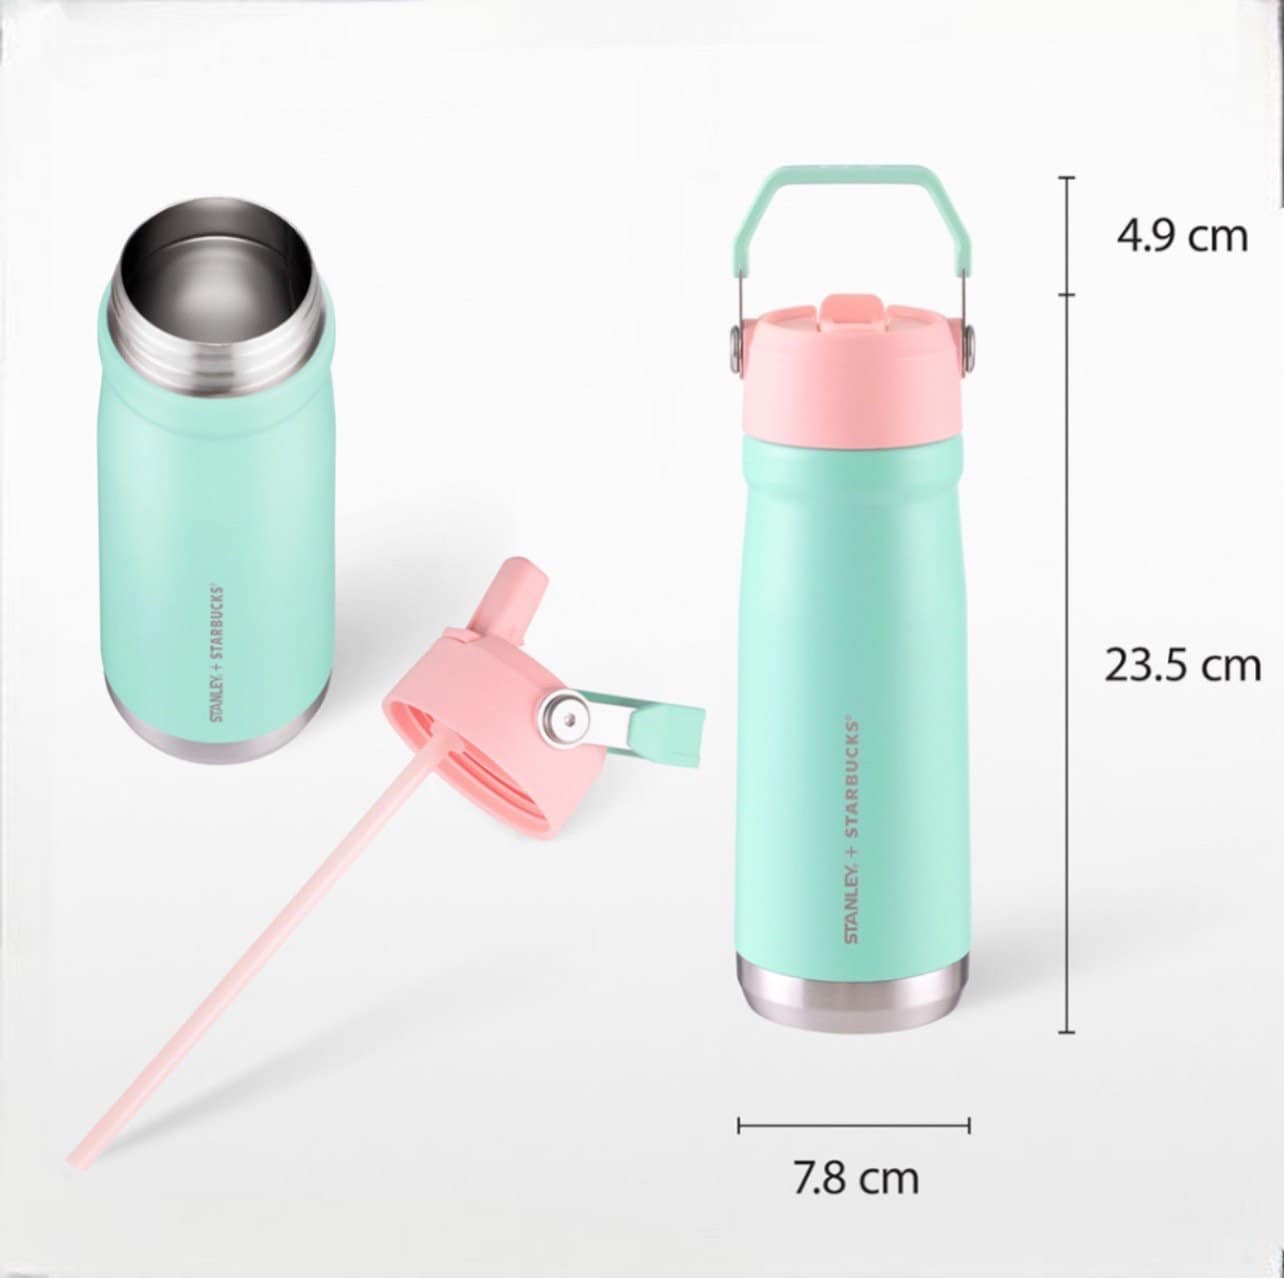 Starbucks Stanley Pastel Two-Toned Turquoise-Pink Flip Top SS Water Bottle, Thailand Exclusive